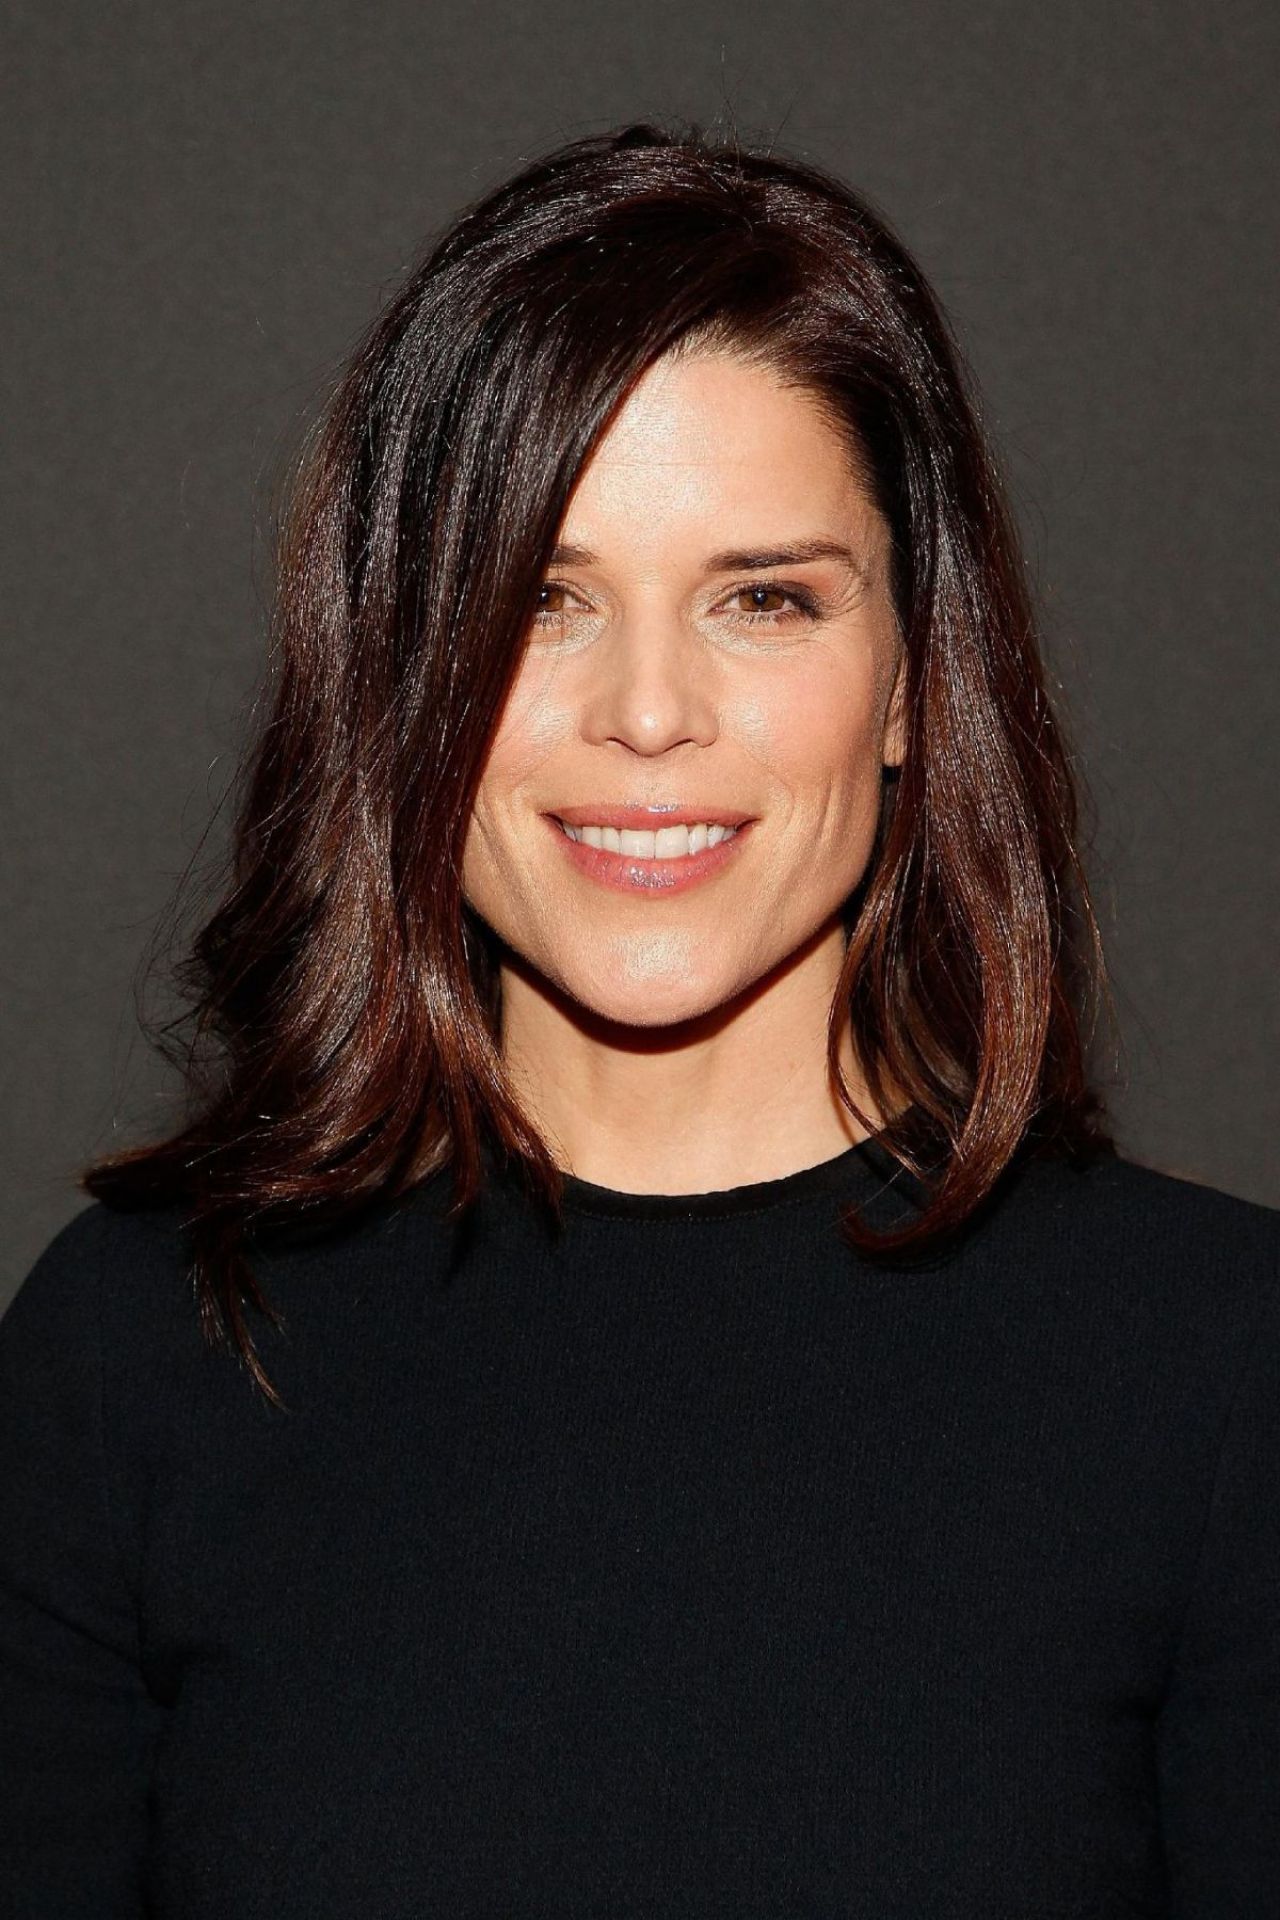 Neve Campbell - House of Cards Season 4 Premiere in Washington, February 20161280 x 1920